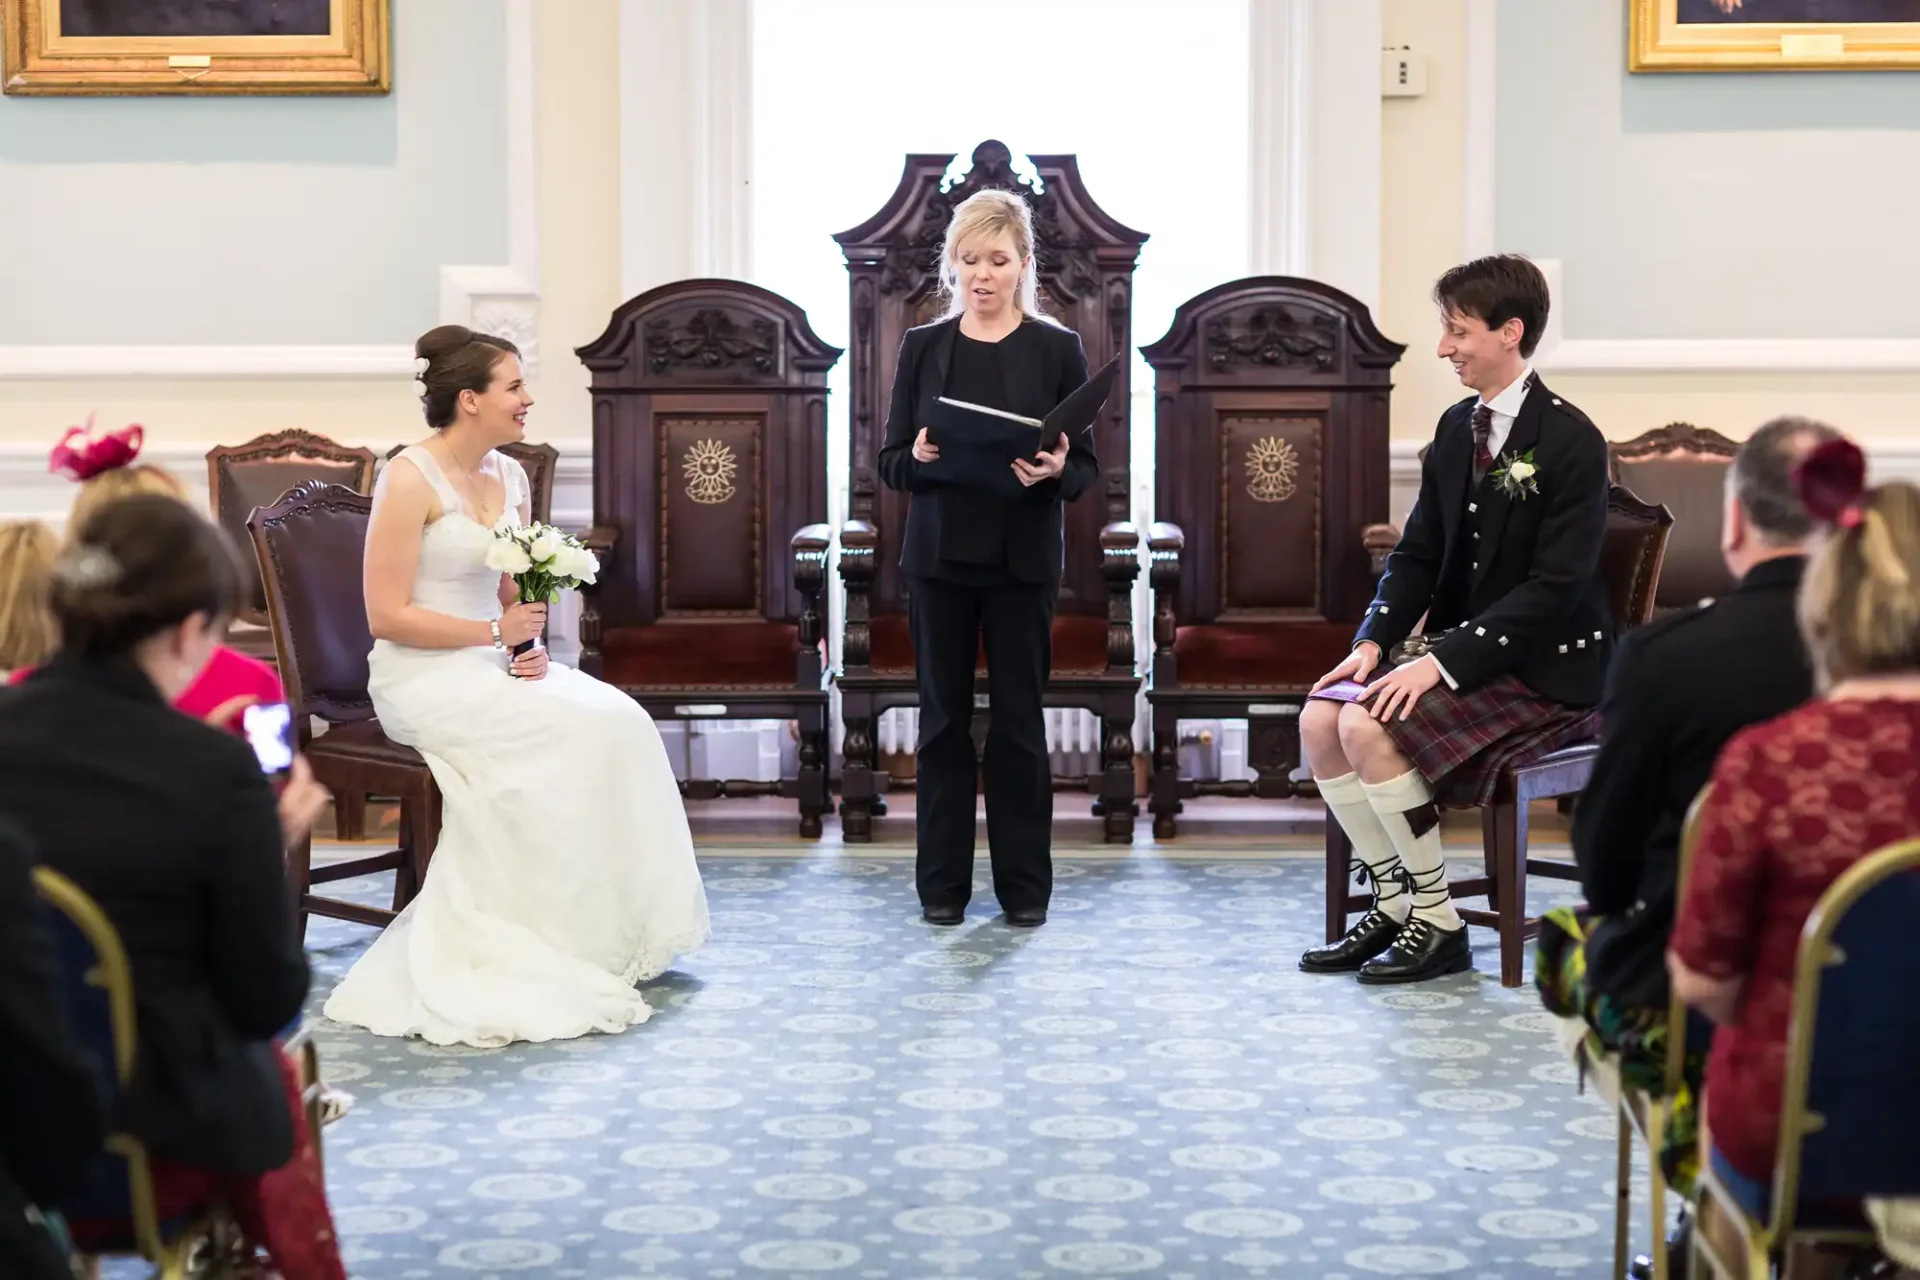 Bride in white dress and groom in scottish kilt sit facing each other at a wedding ceremony, with an officiant speaking and guests seated around them.